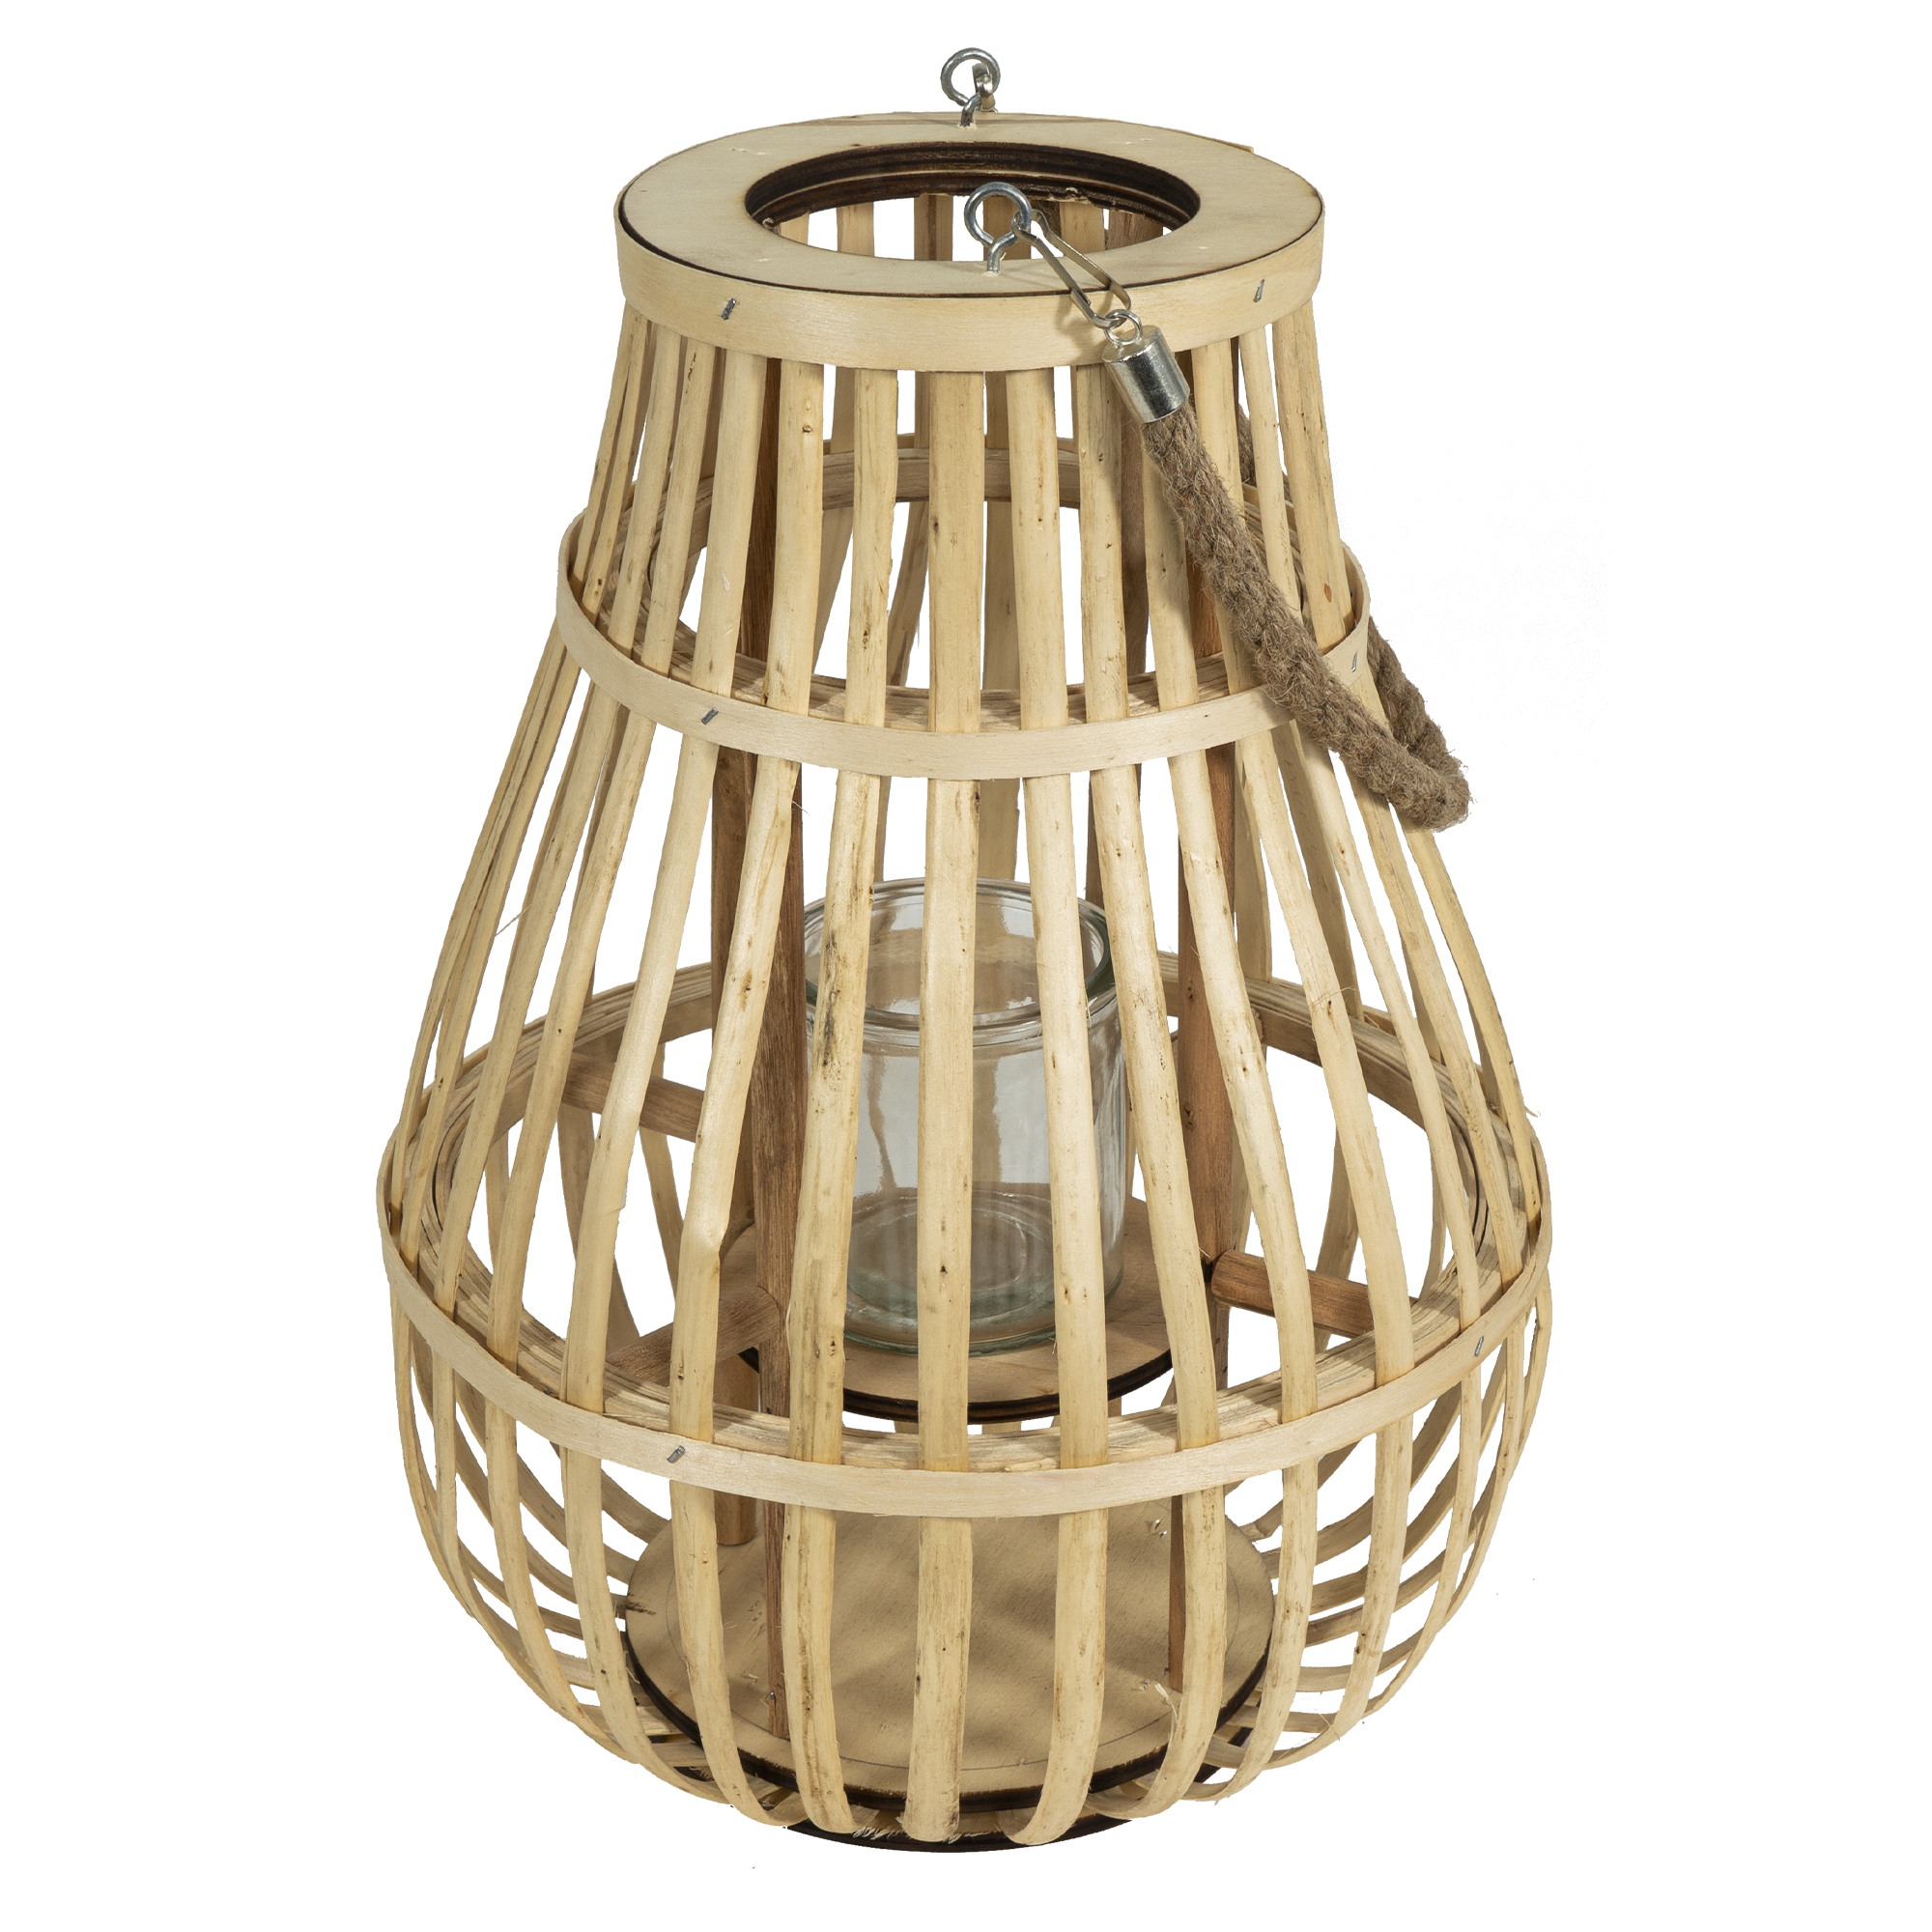 Rattan Lantern With Glass Candle Holder 14"